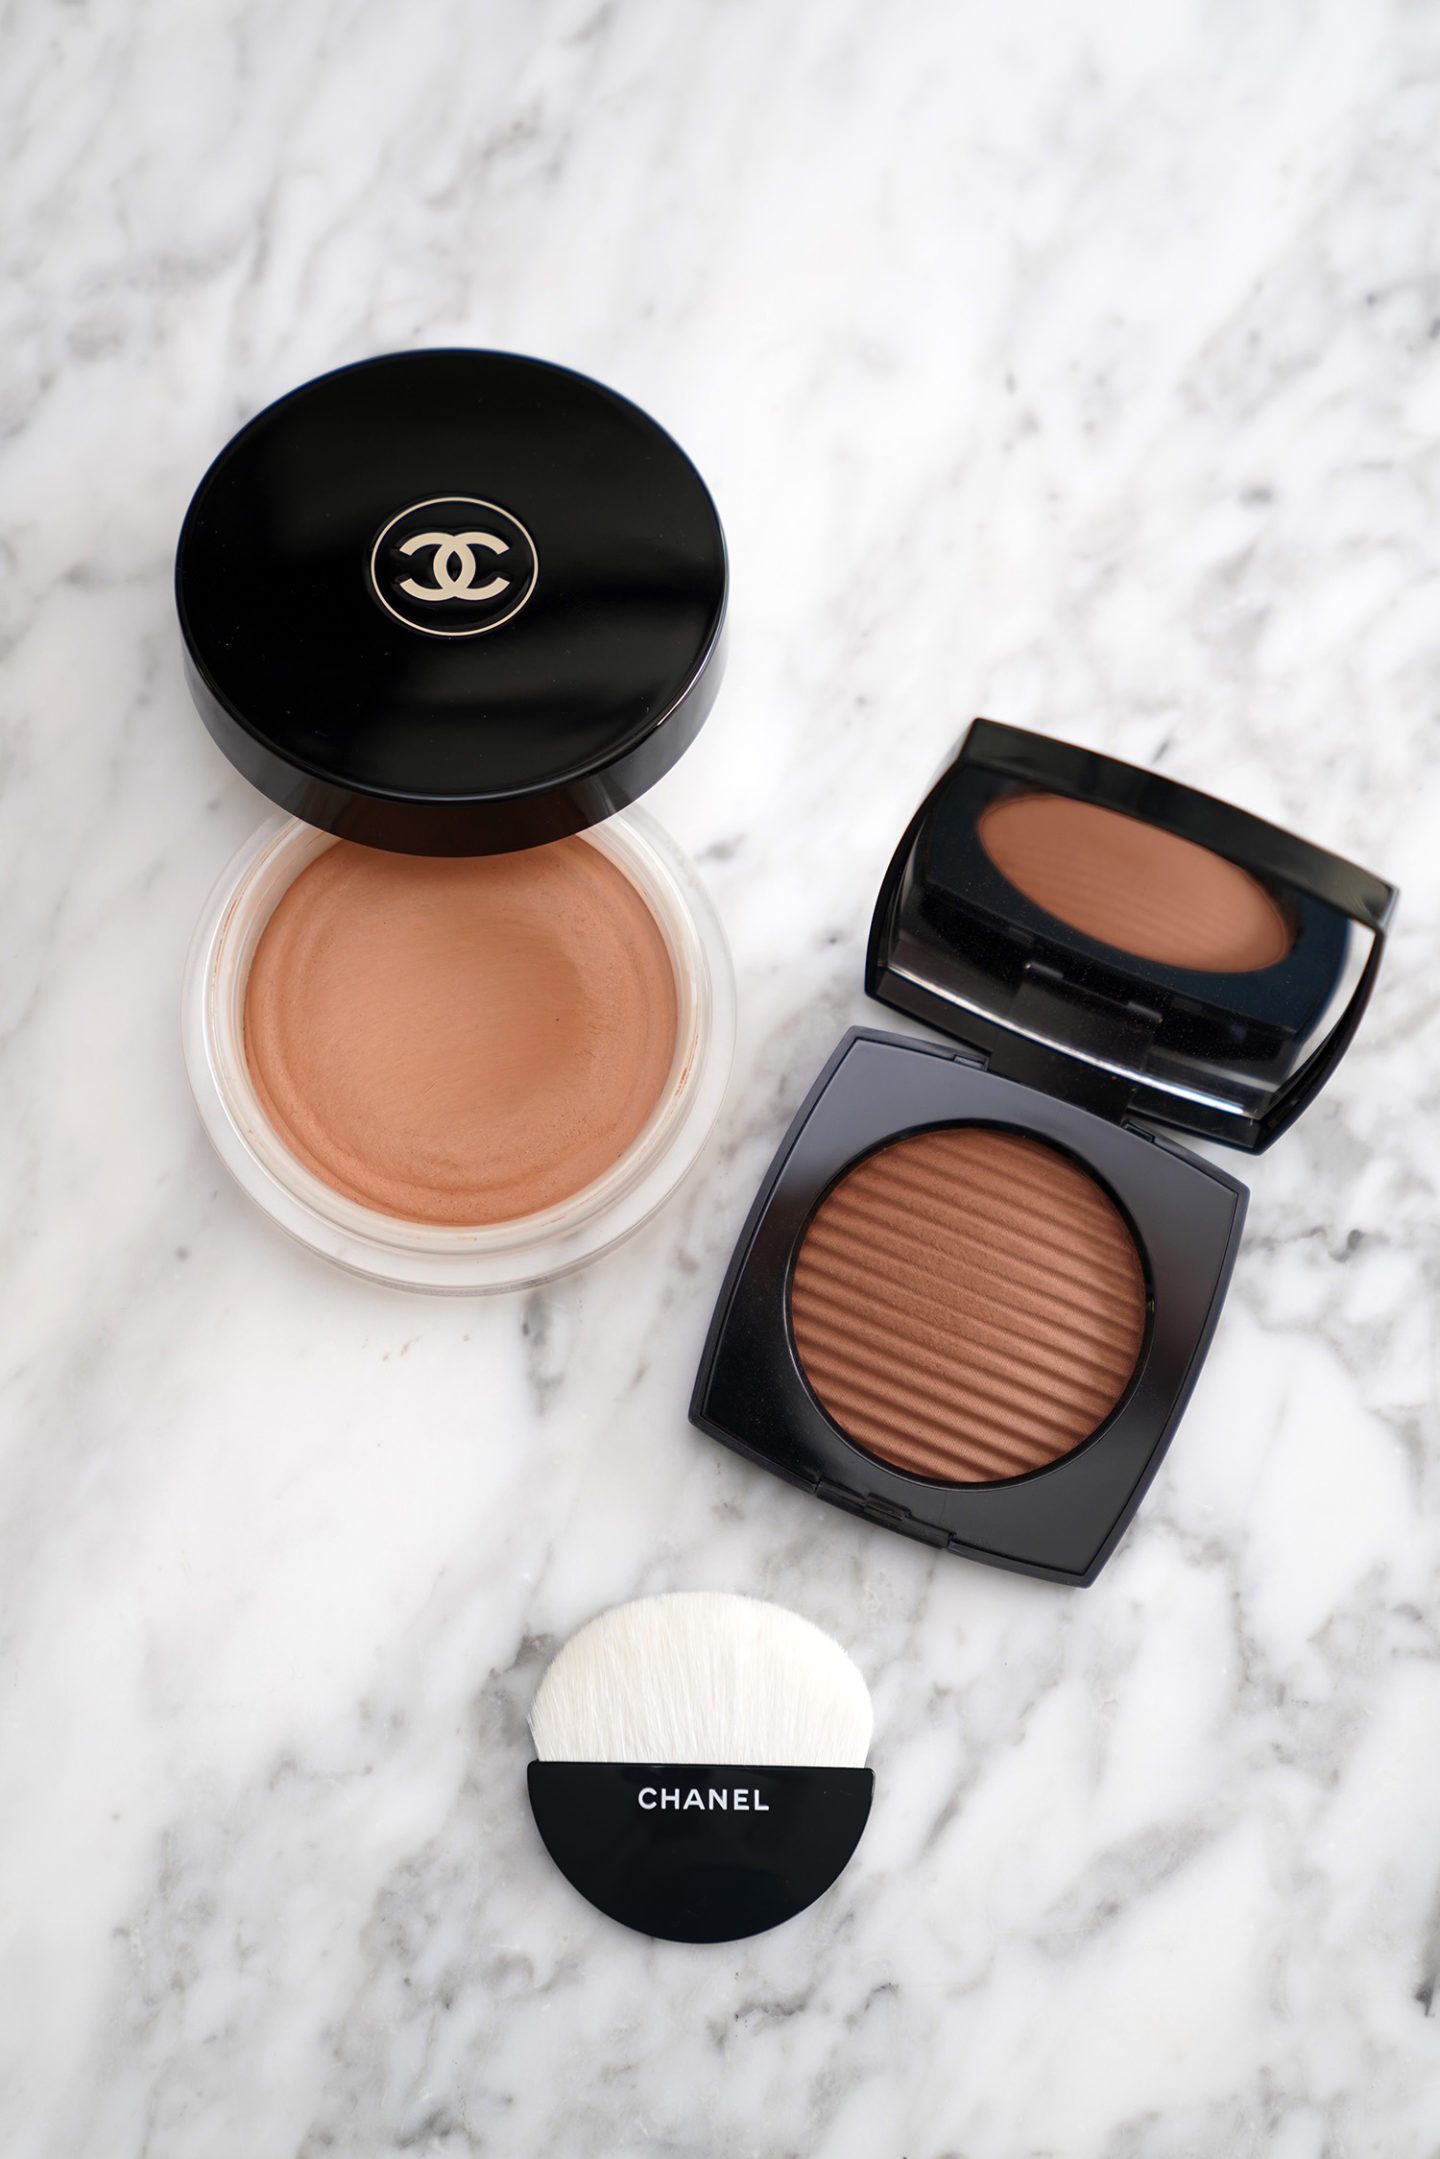 Chanel Les Beiges Bronzing Cream and Luminous Powder in Deep